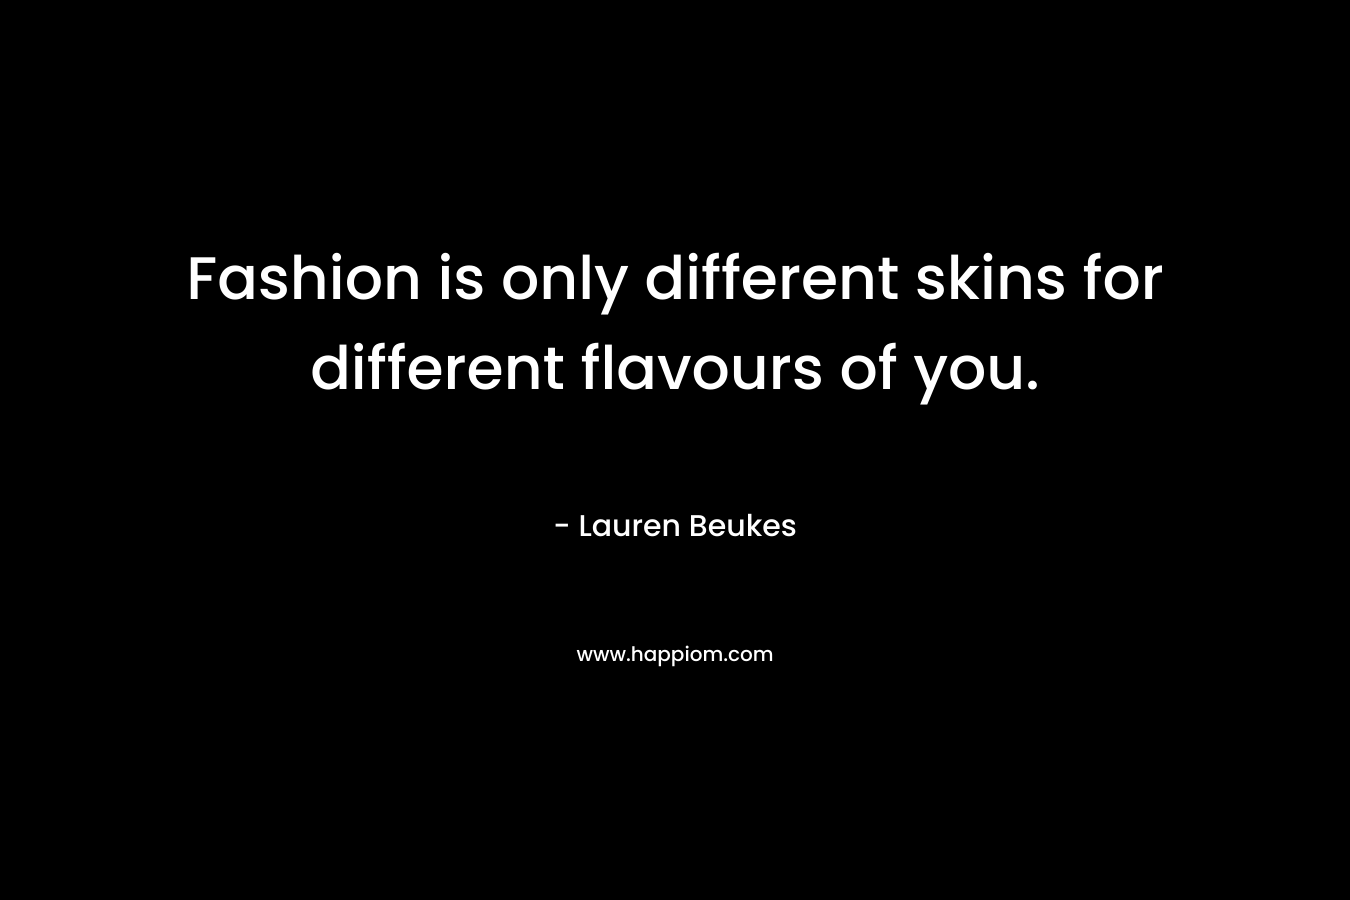 Fashion is only different skins for different flavours of you. – Lauren Beukes